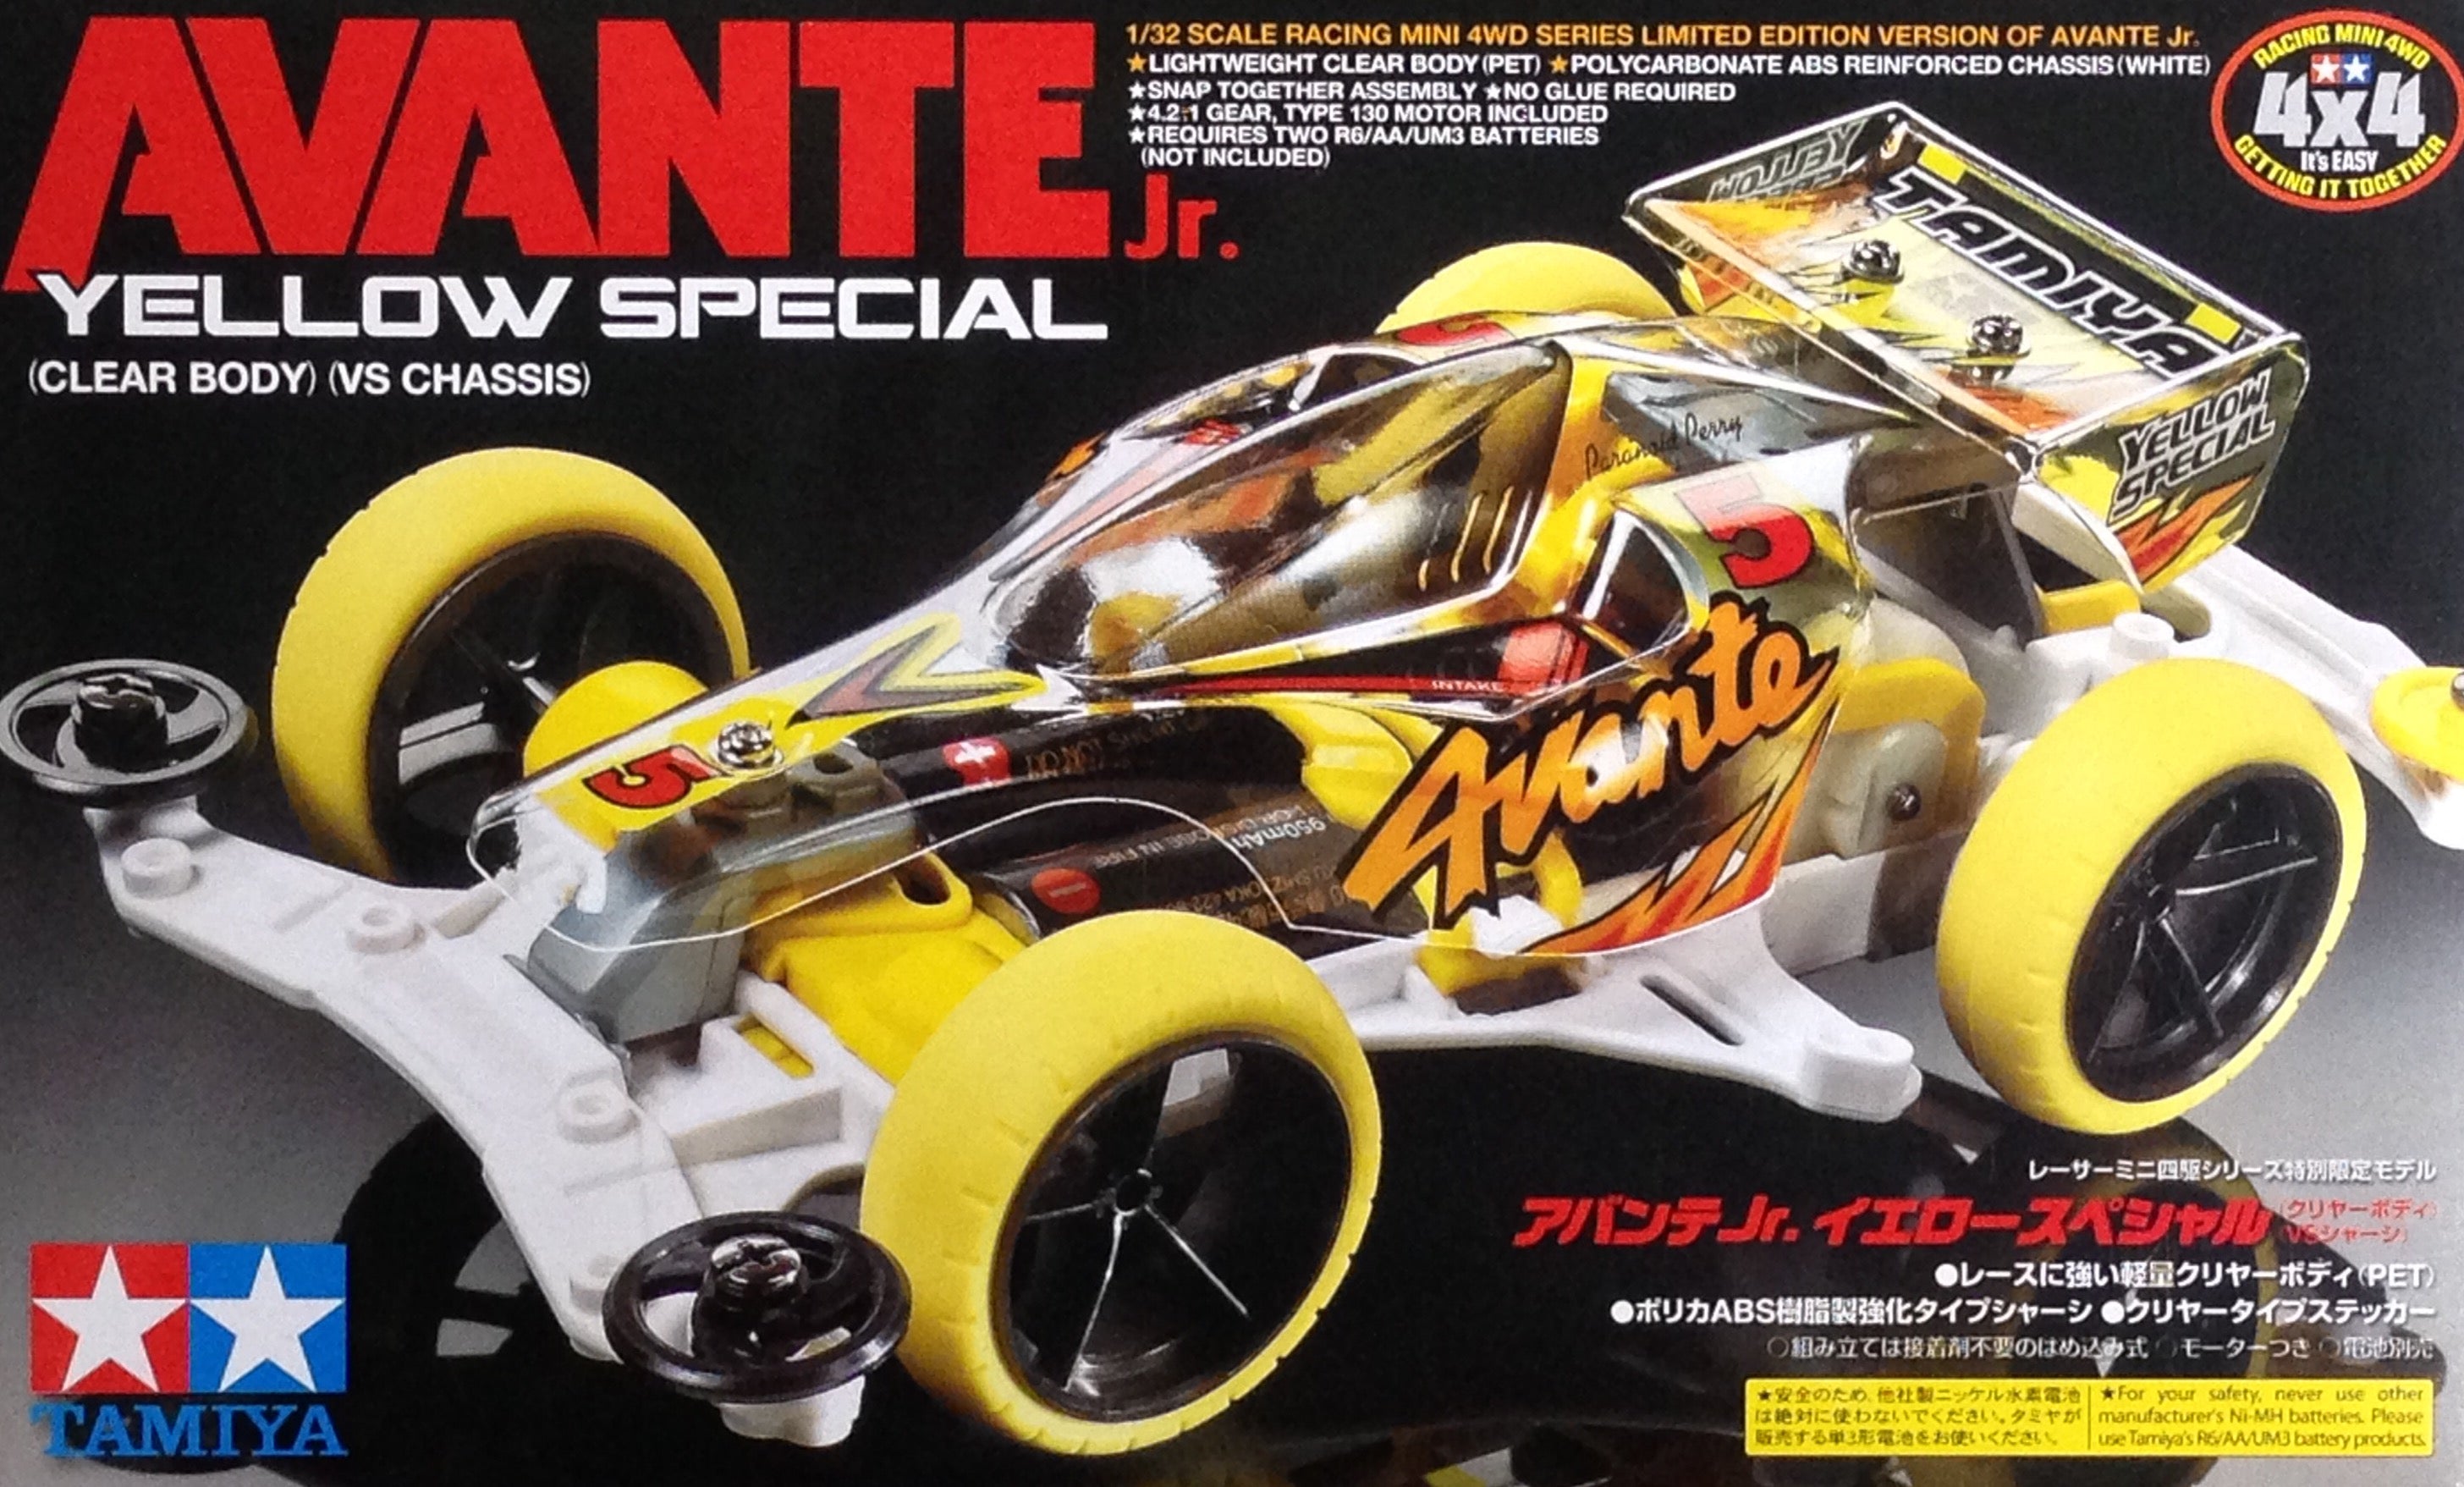 95060 Avante Jr. Clear Body - VS Chassis Yellow Special